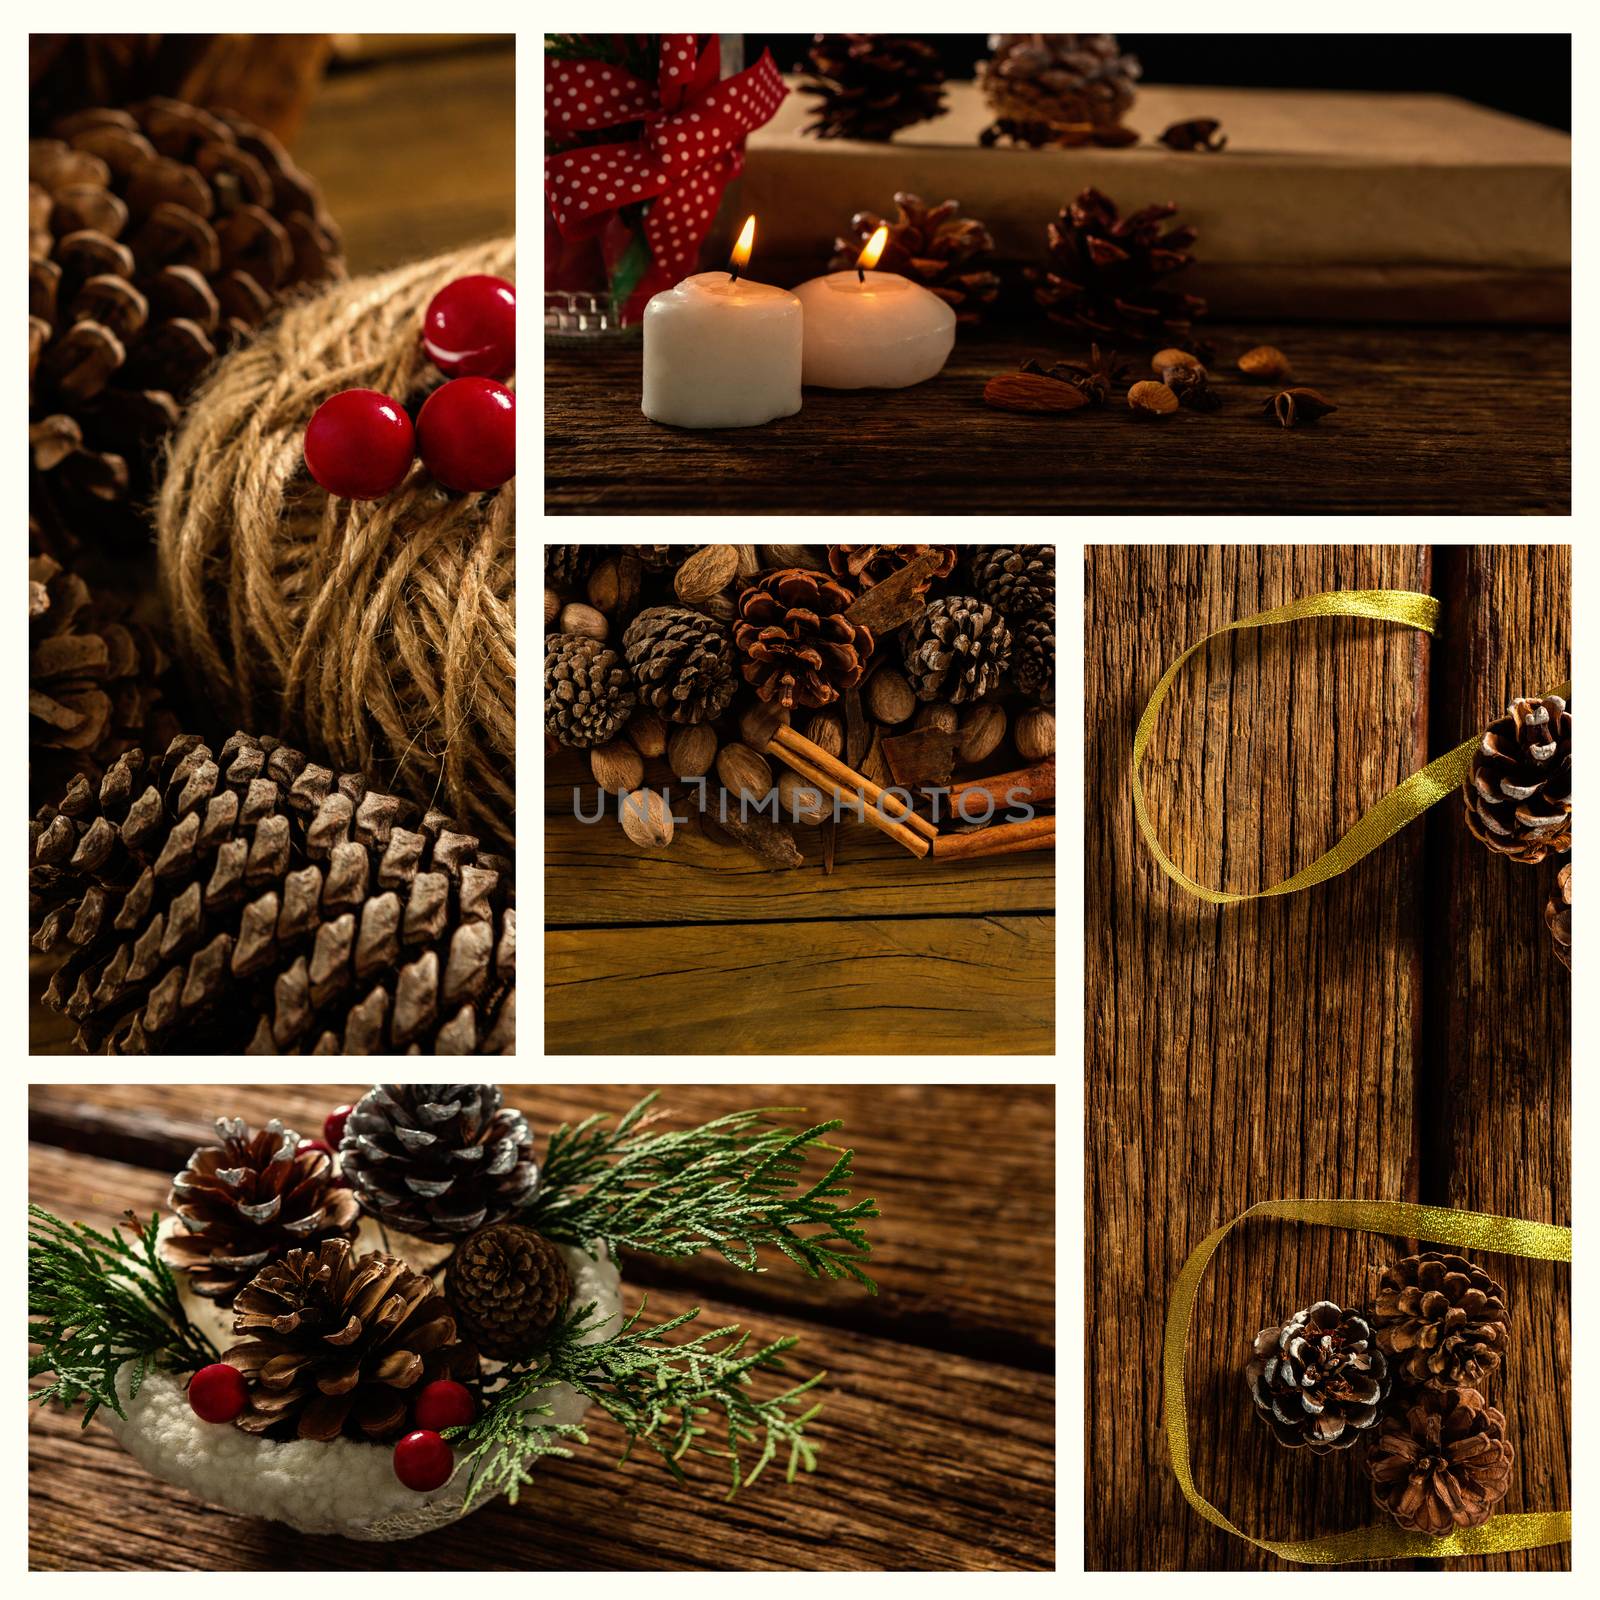 Candle and pine cone on wood table  by Wavebreakmedia